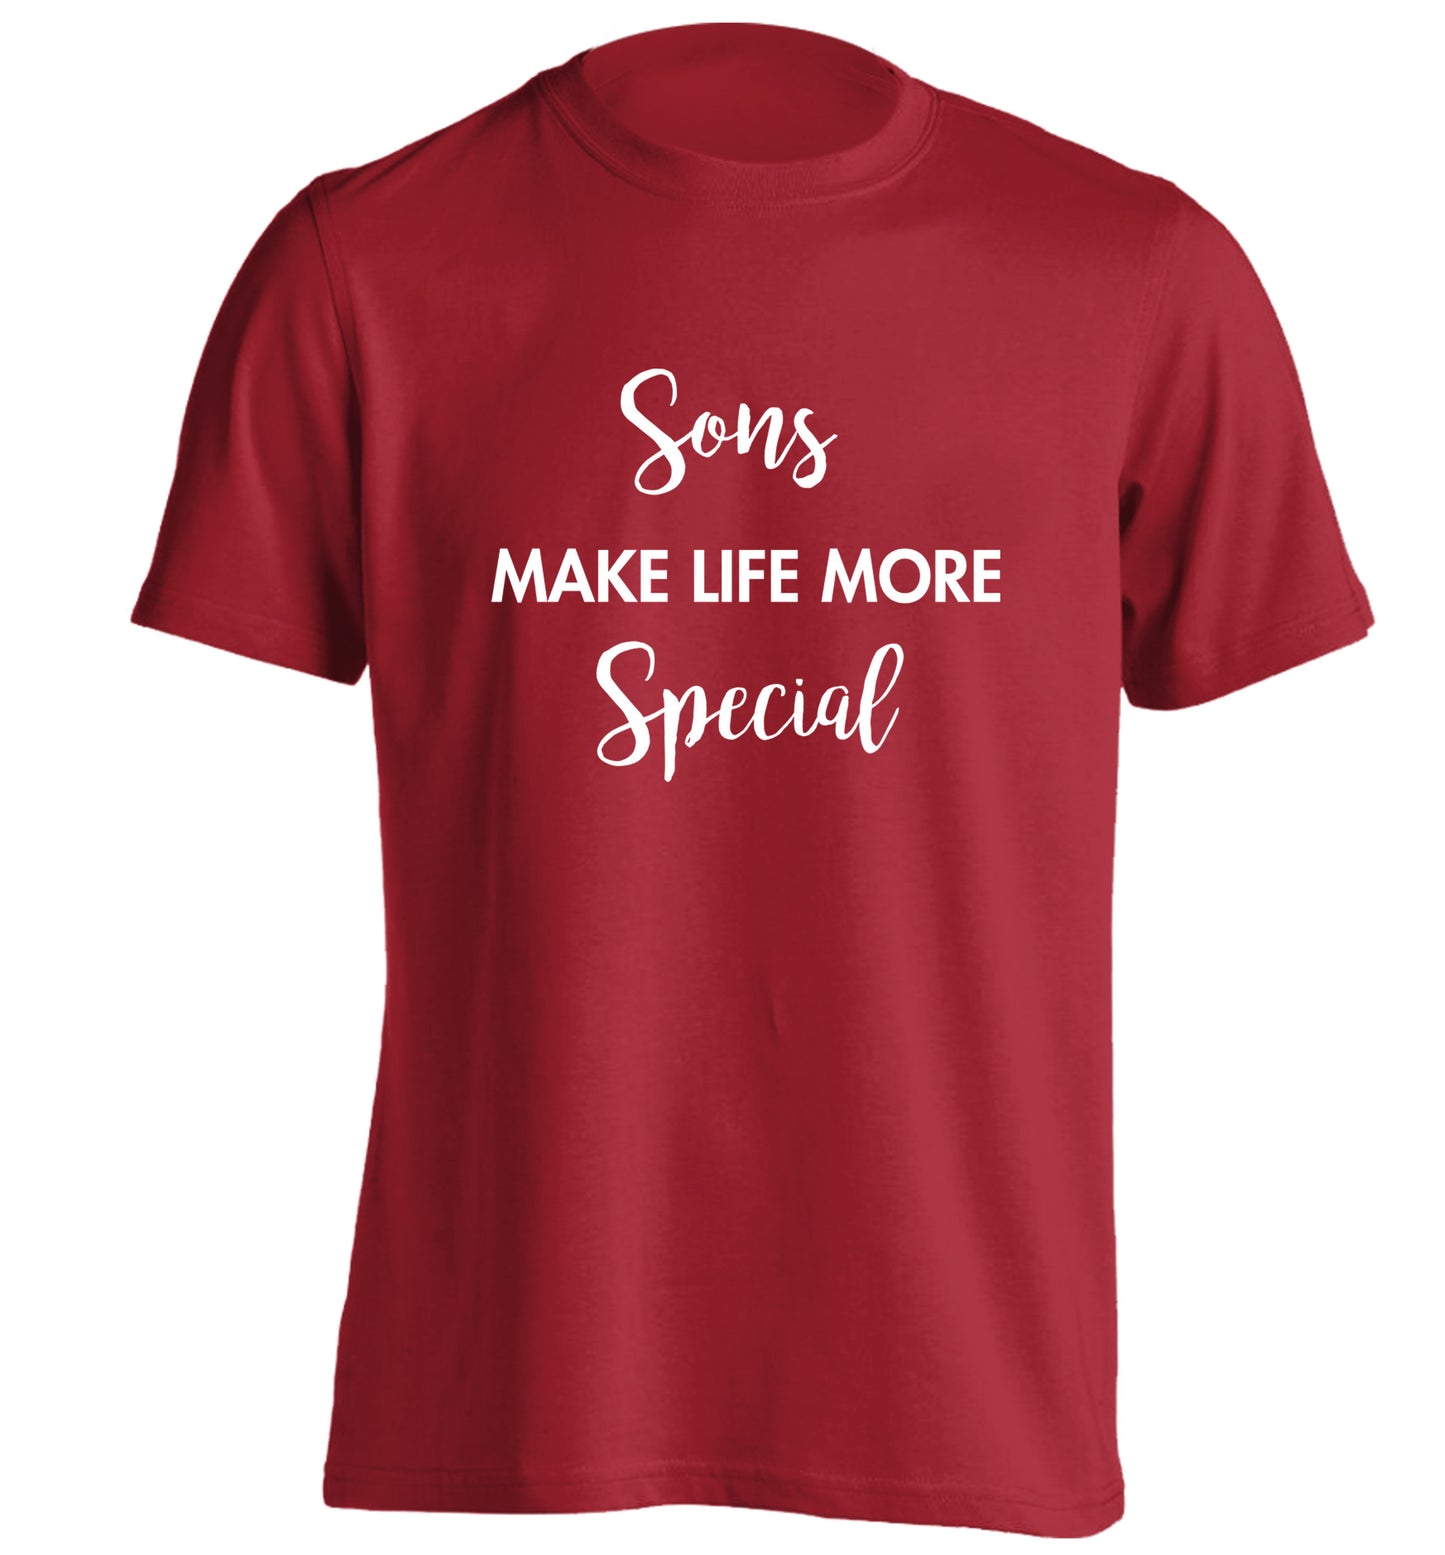 Daughters make life more special adults unisex red Tshirt 2XL